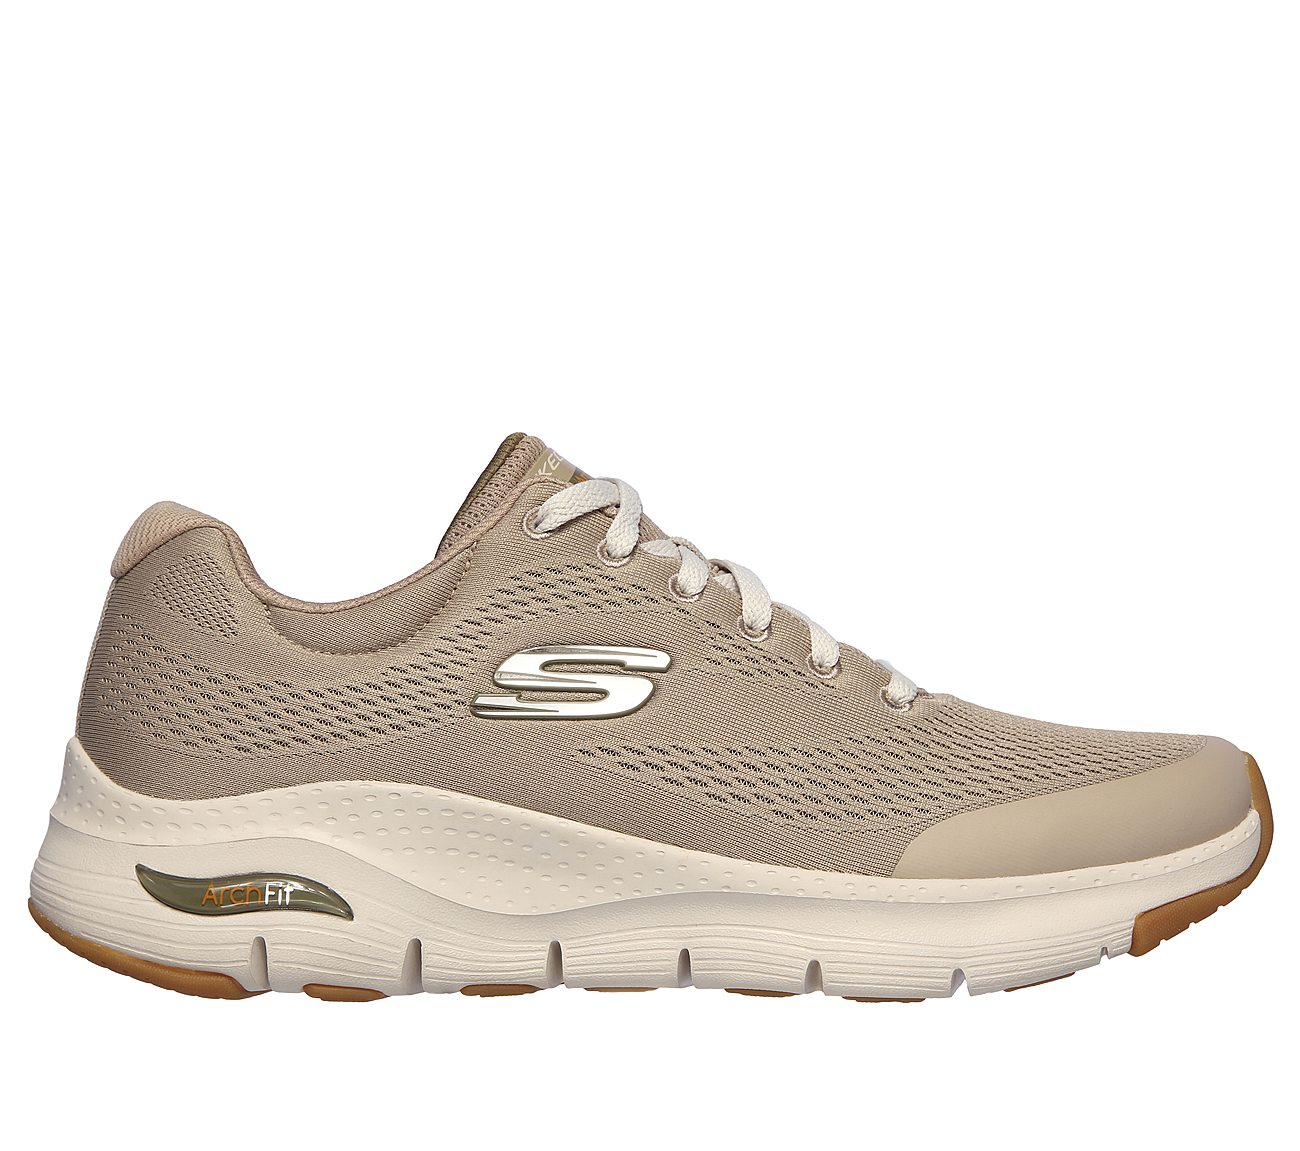 skechers with ankle support